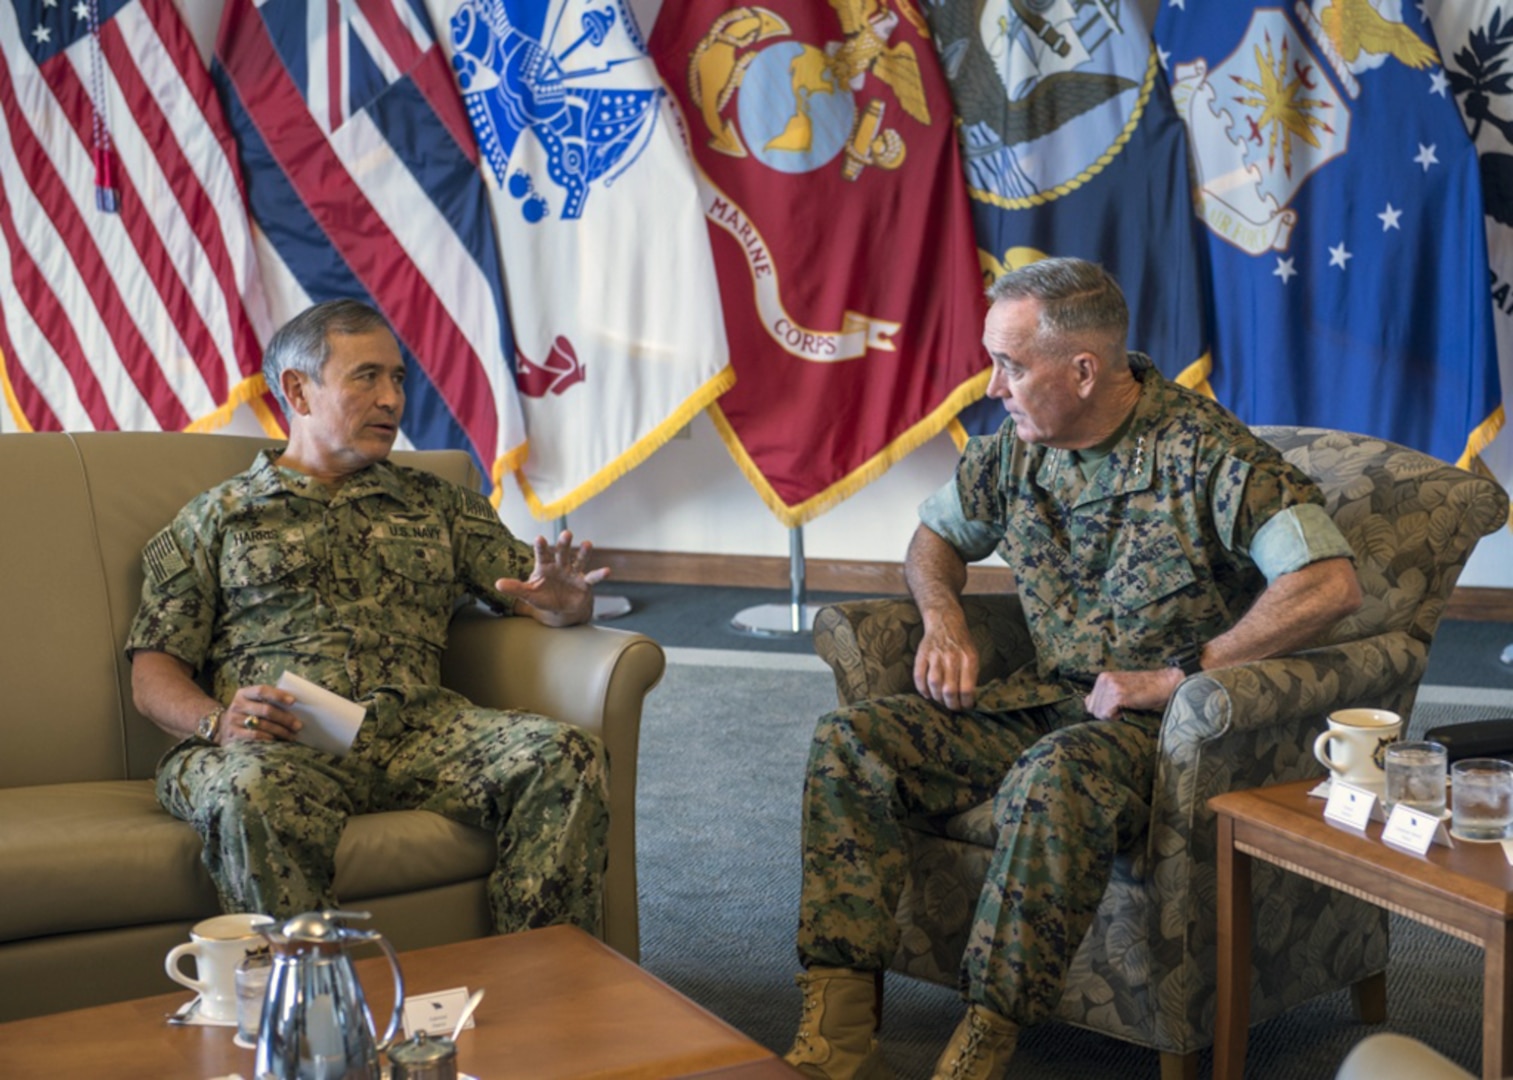 Dunford to Visit China, South Korea, Japan to Discuss Range of Issues